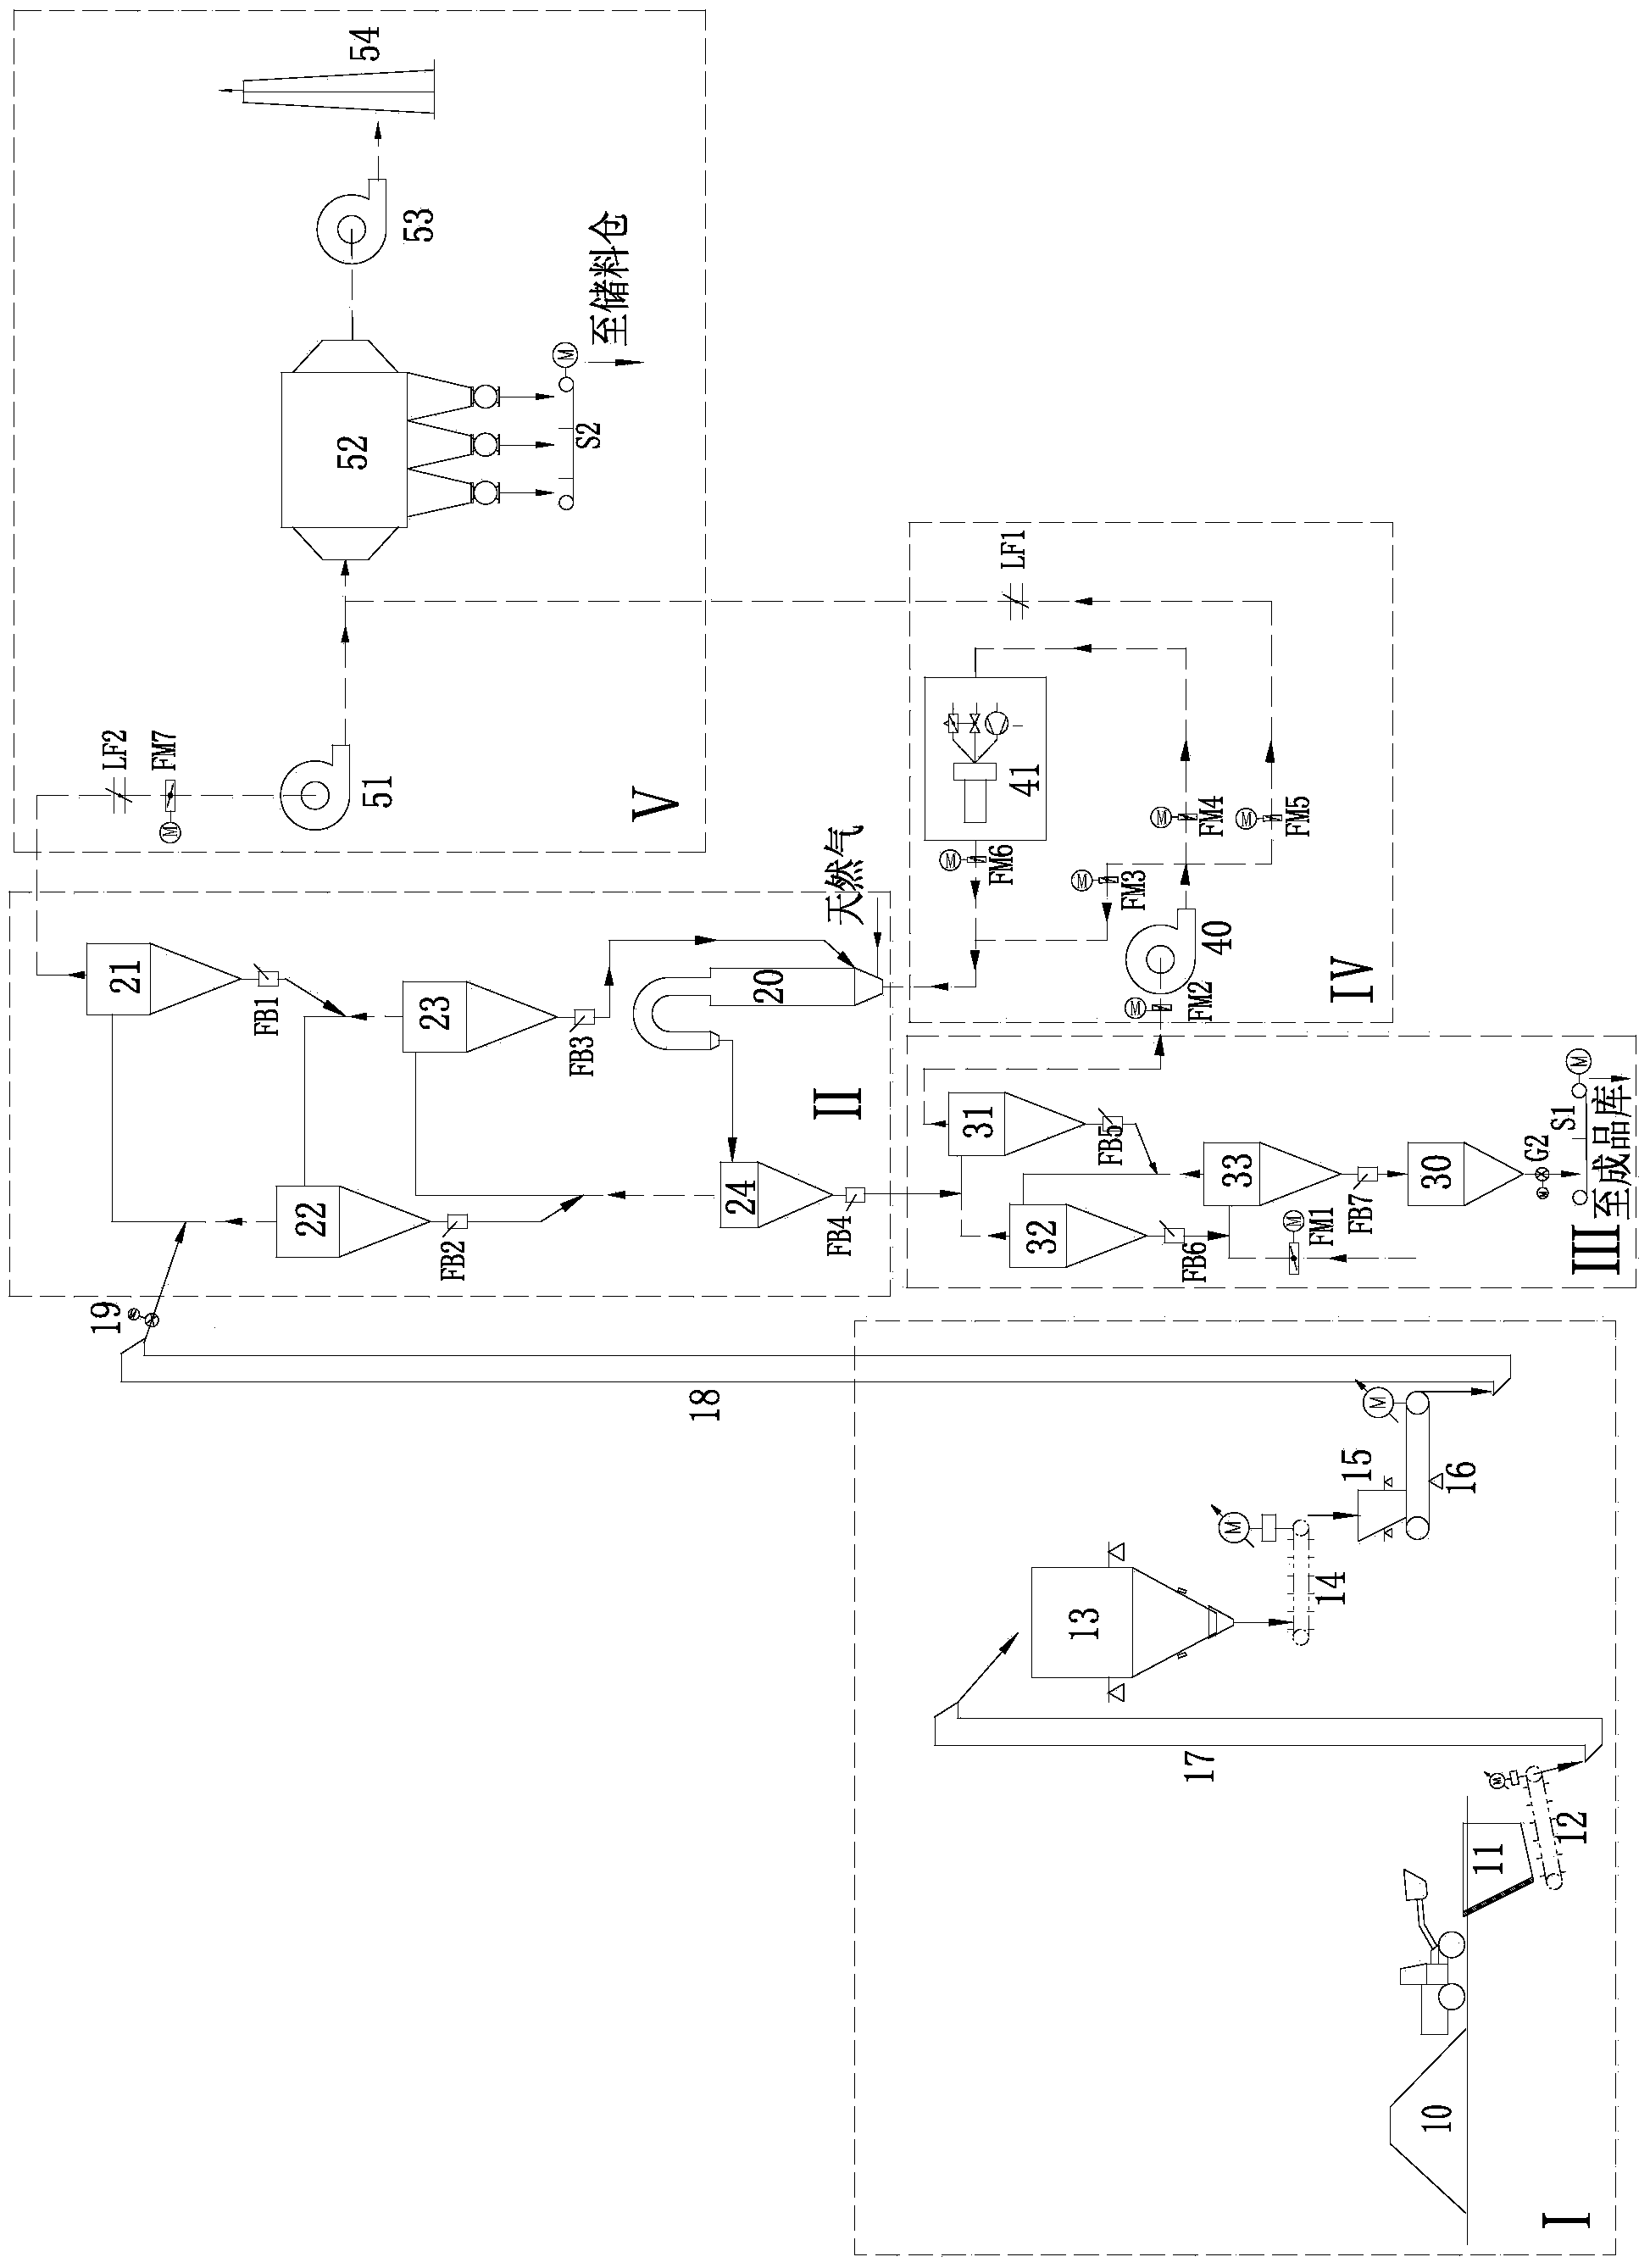 Production system of suspended-state calcined coal gangues